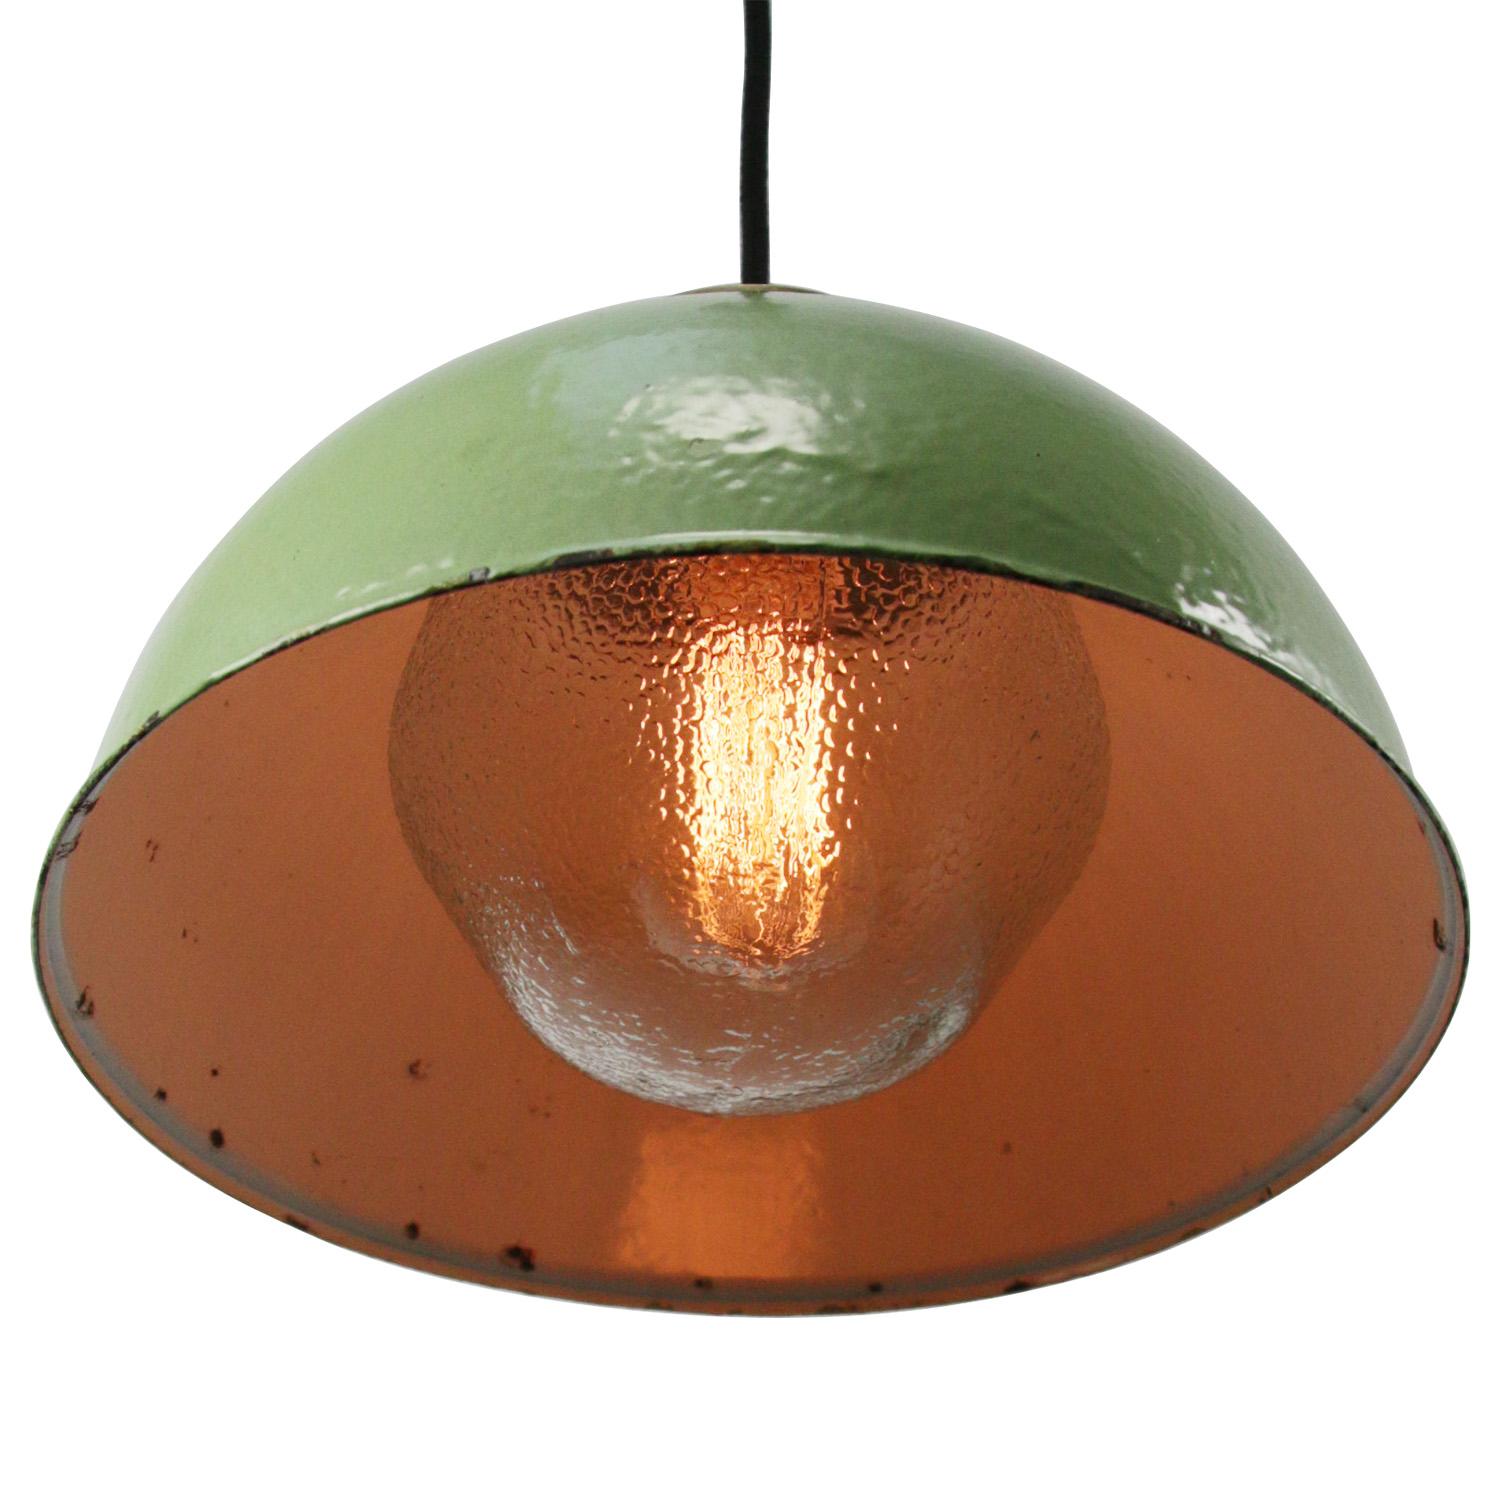 Green enamel Industrial hanging lamp.
Frosted glass with brass top.

Weight: 2.35 kg / 5.2 lb

Priced per individual item. All lamps have been made suitable by international standards for incandescent light bulbs, energy-efficient and LED bulbs.